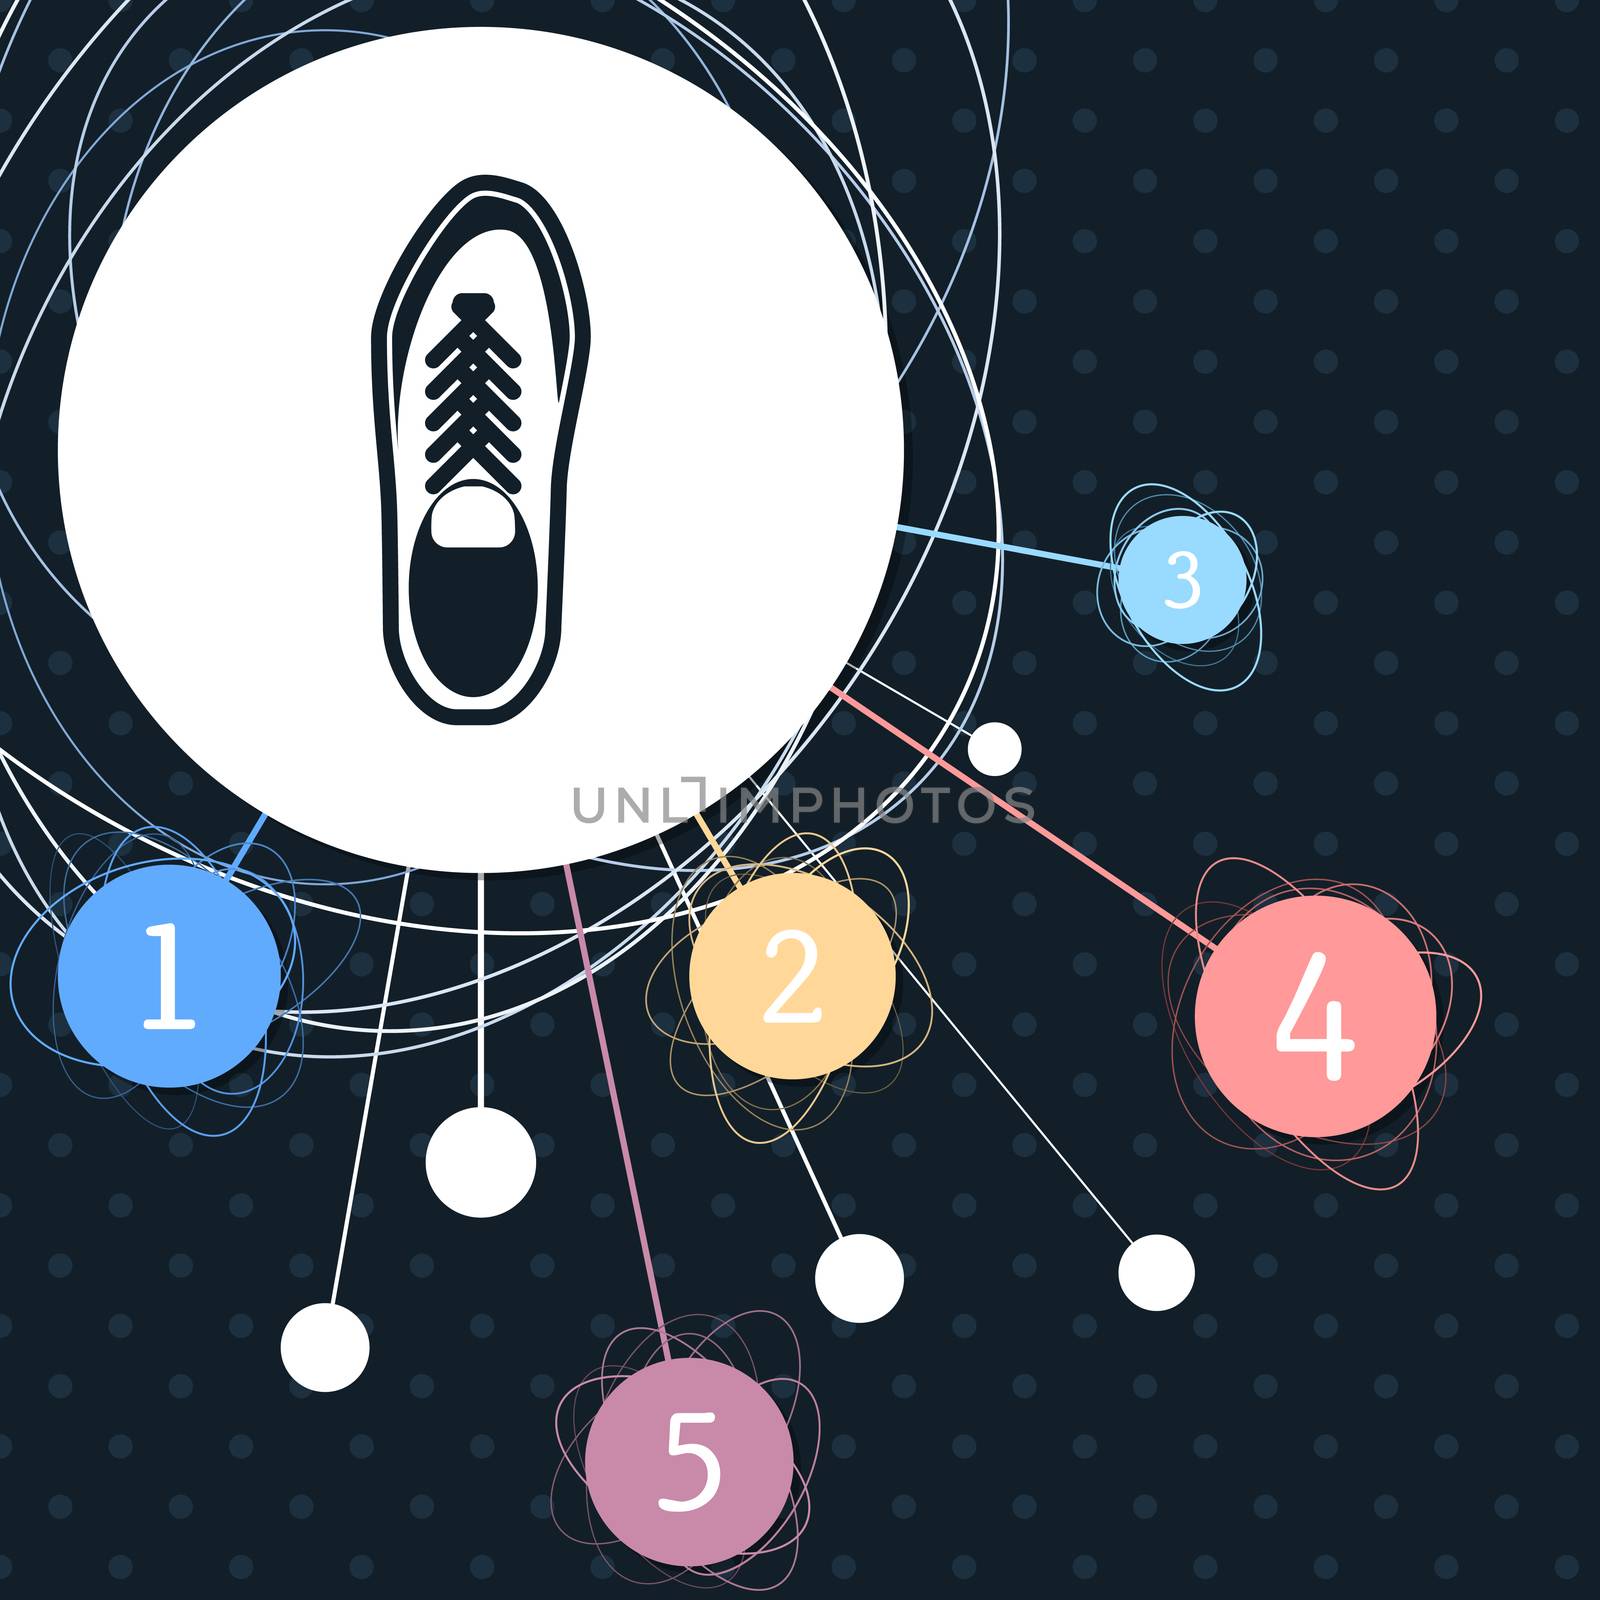 low shoe icon with the background to the point and infographic style.  by Adamchuk